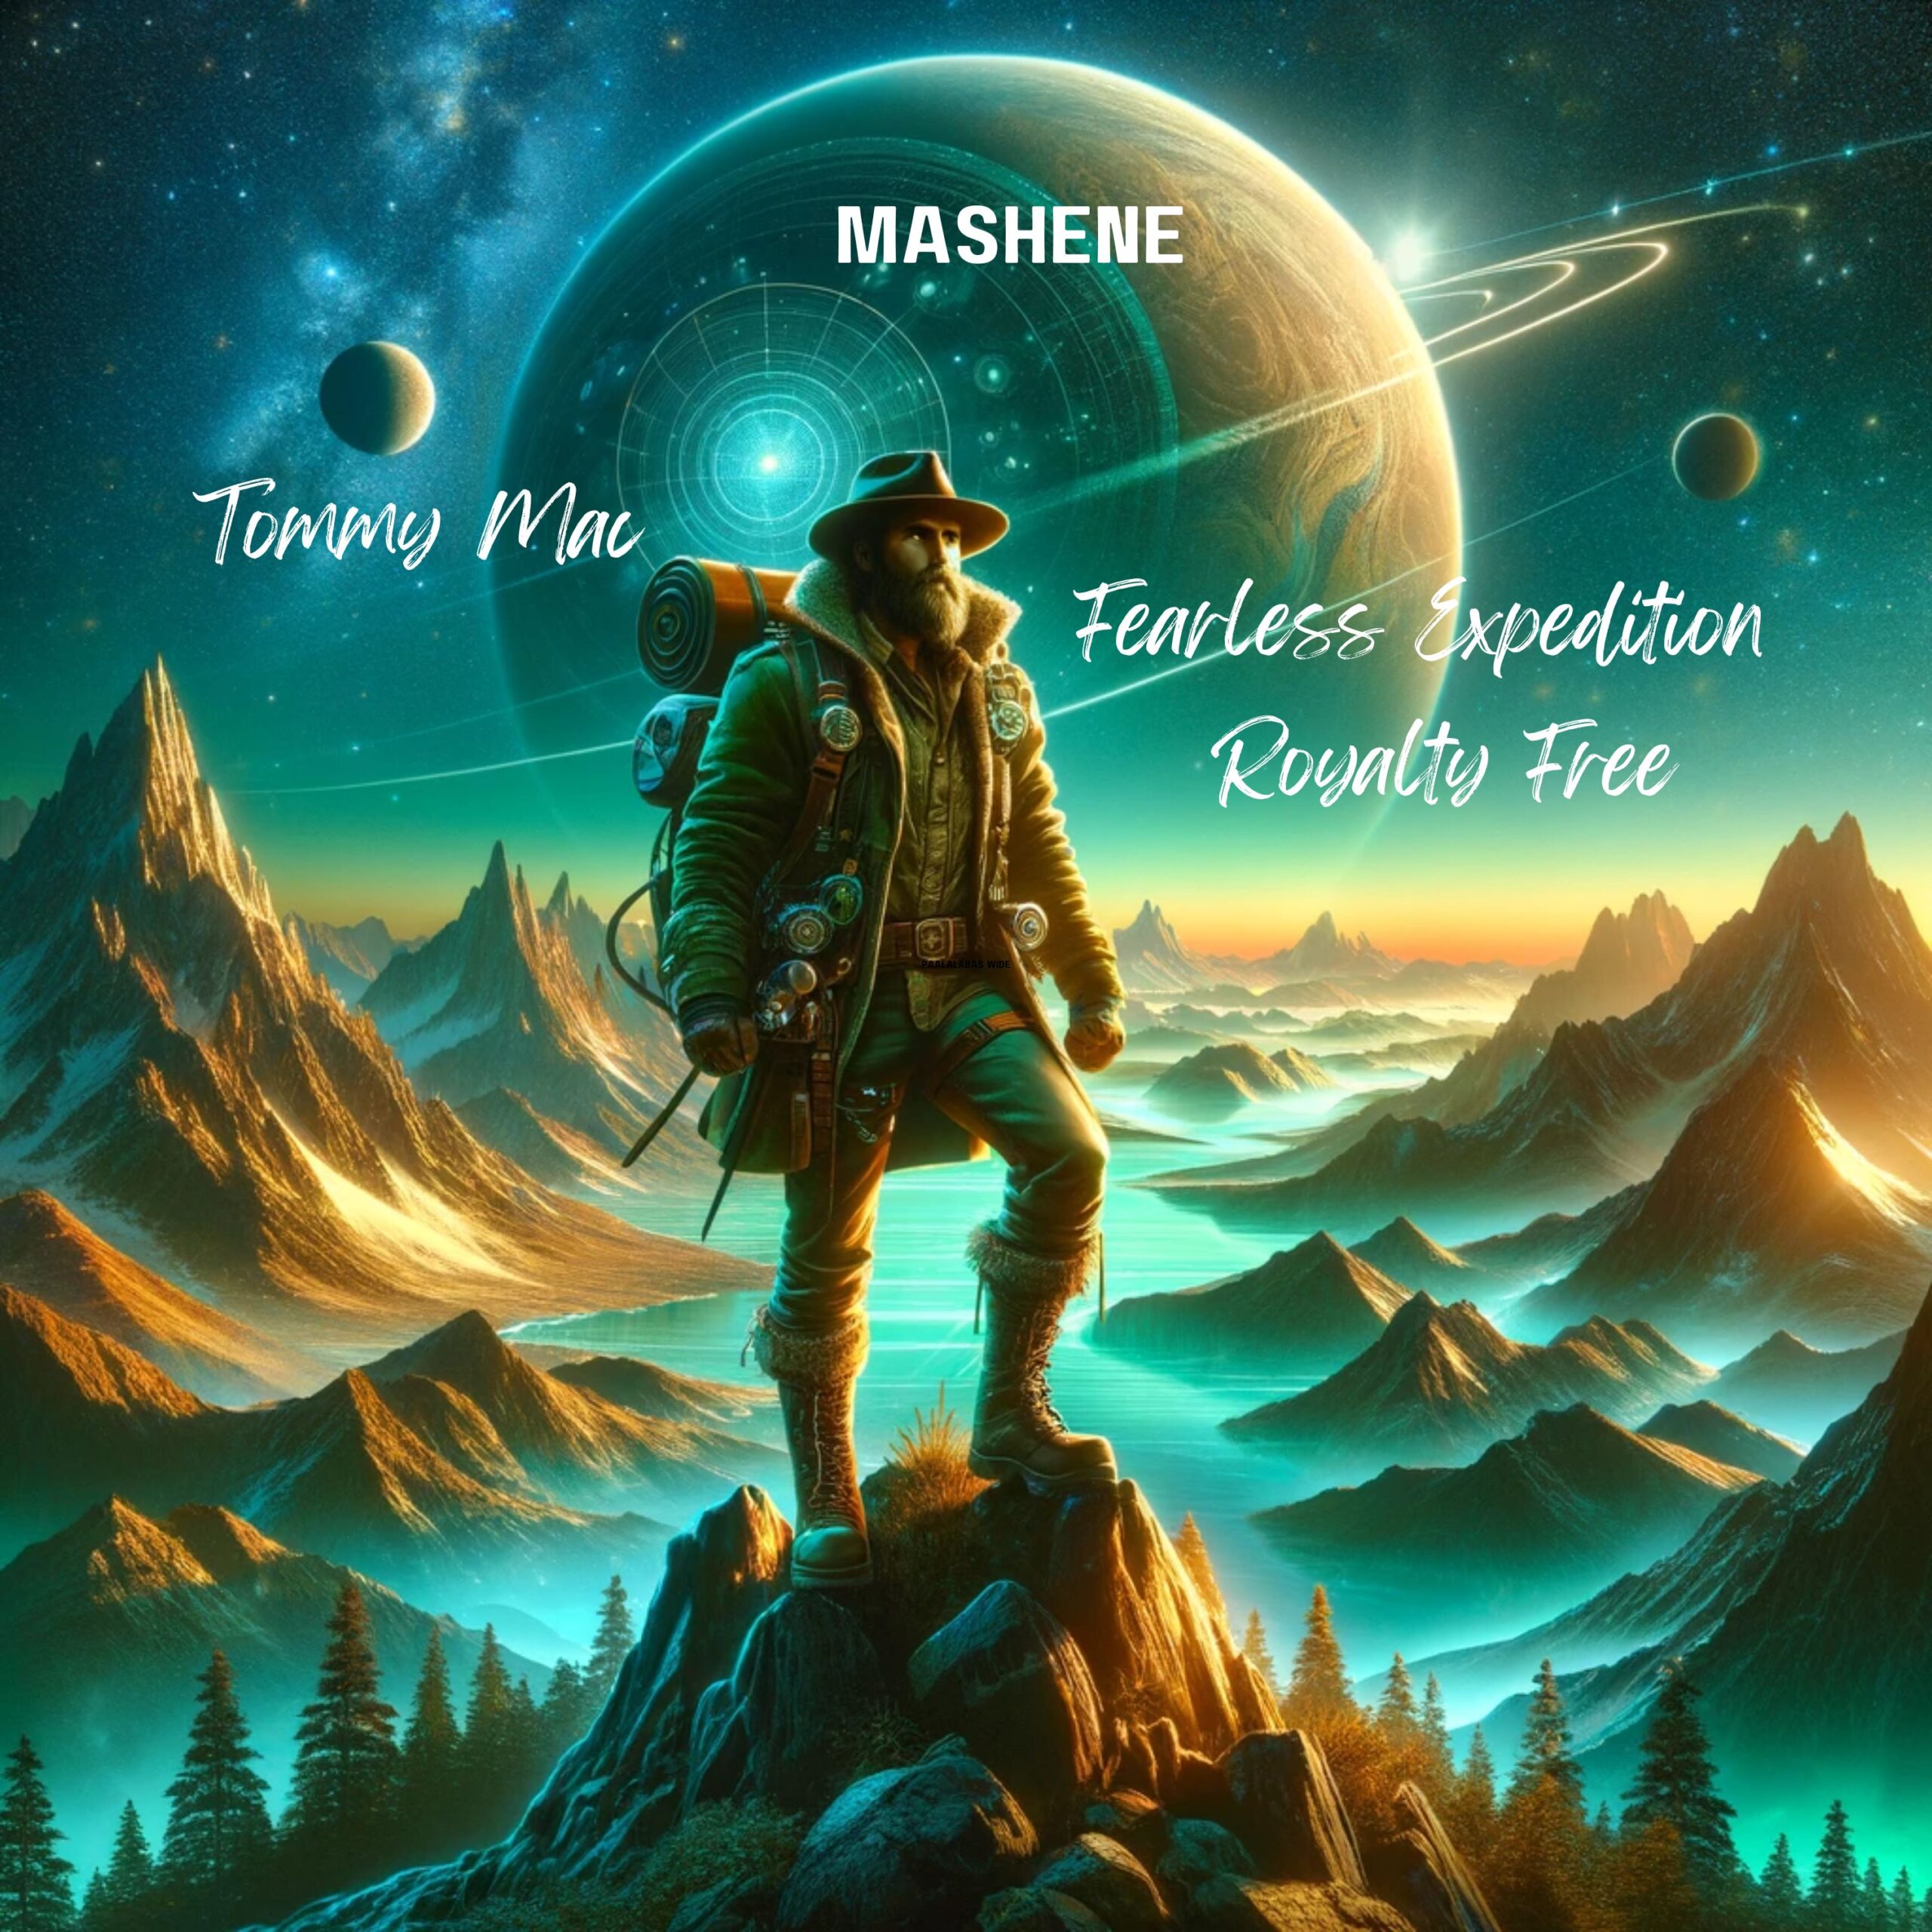 Album cover depicting an explorer in vintage gear standing on a mountain peak, overlooking an alien landscape with luminescent waters under a starlit sky